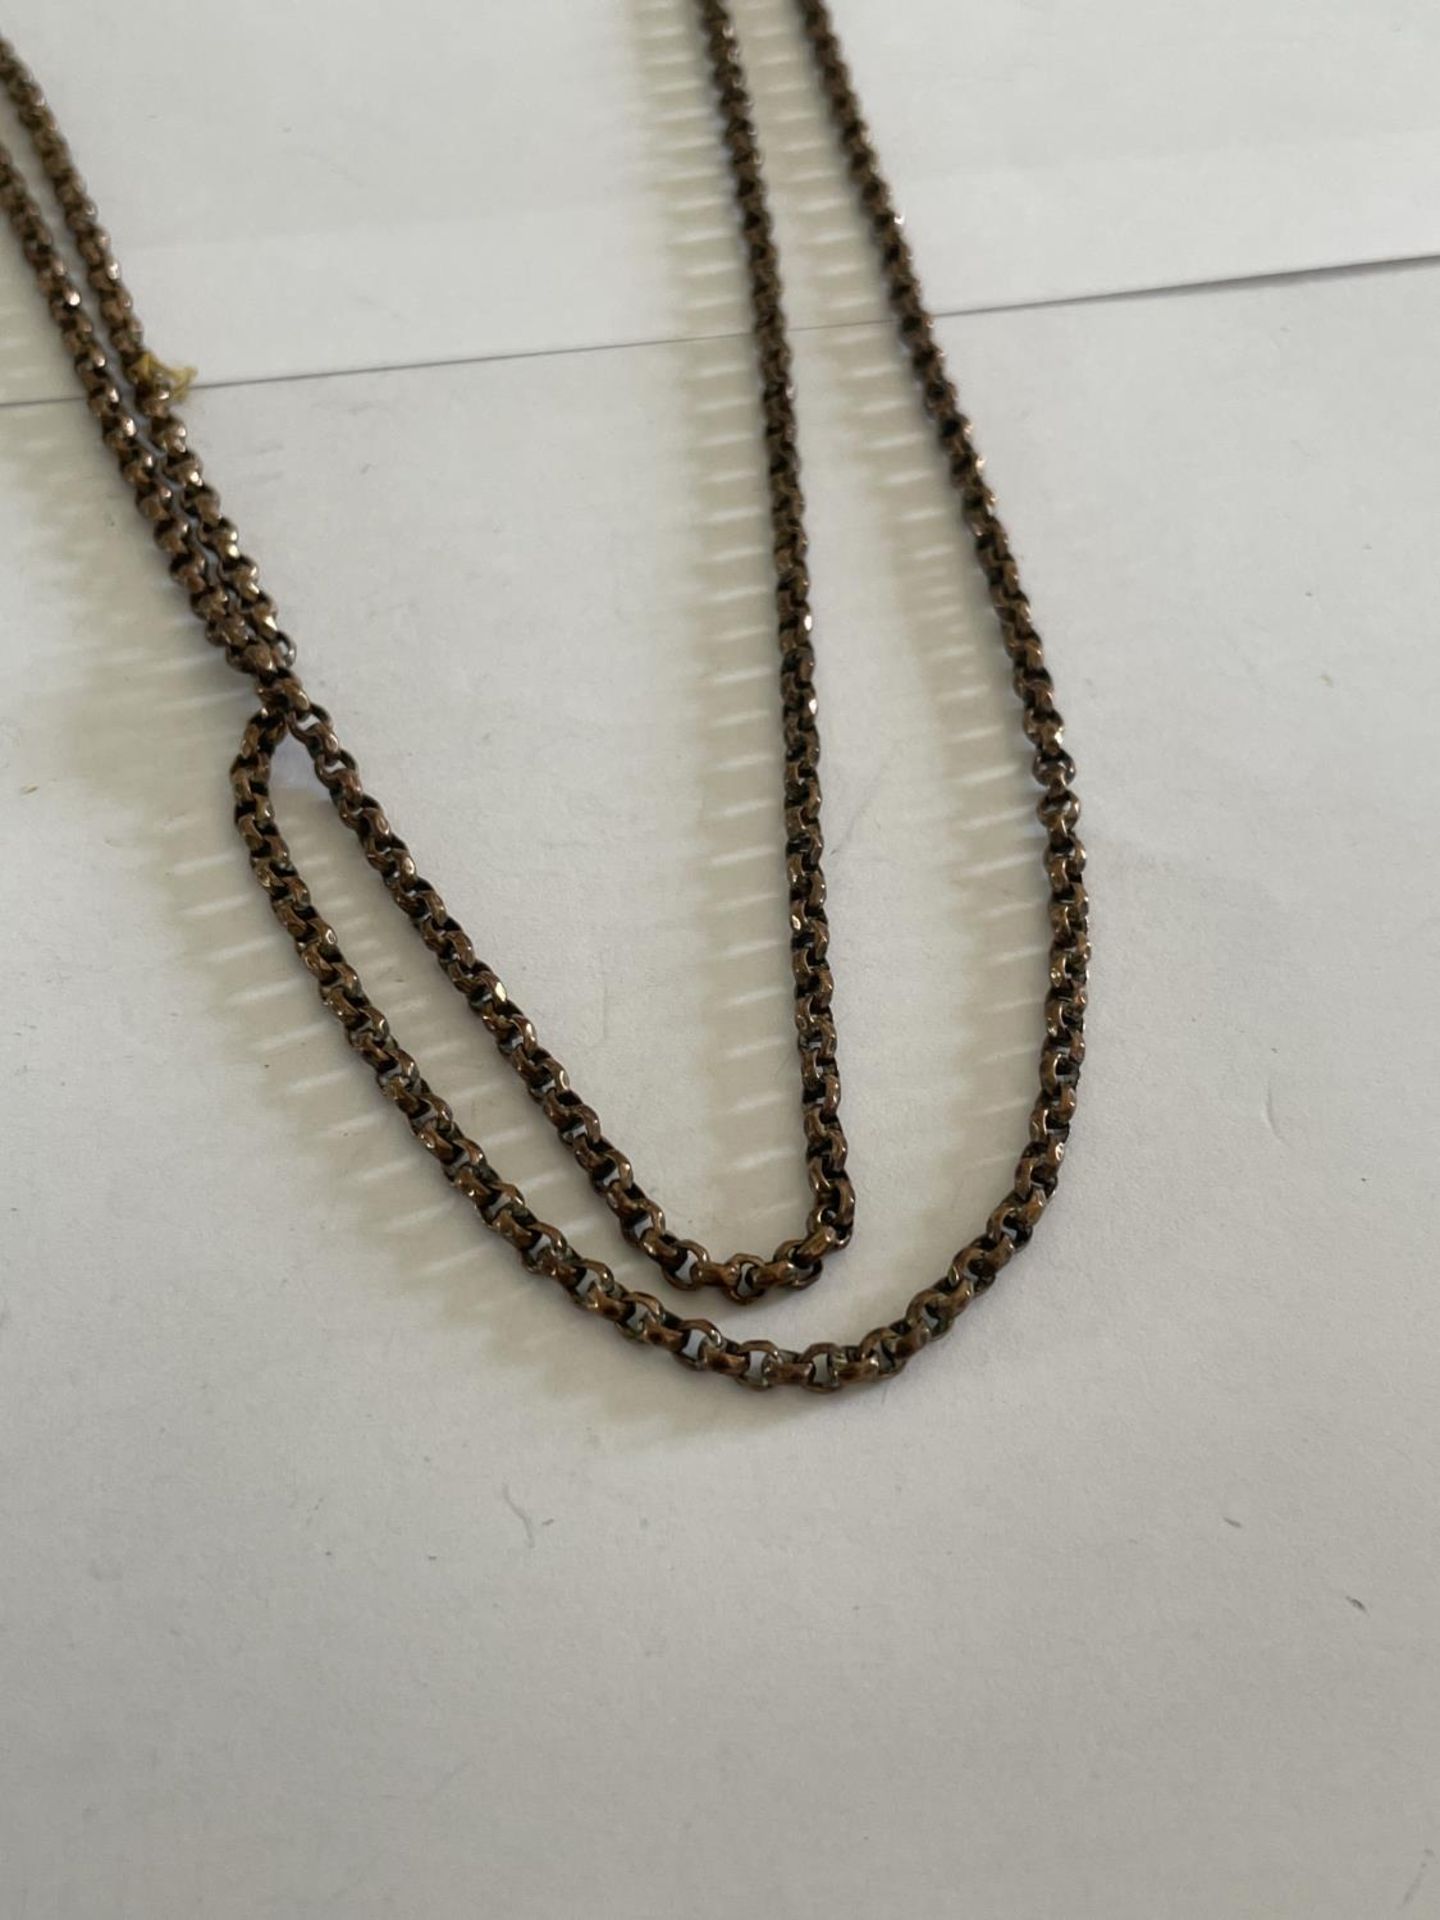 A MUFF CHAIN - Image 2 of 2